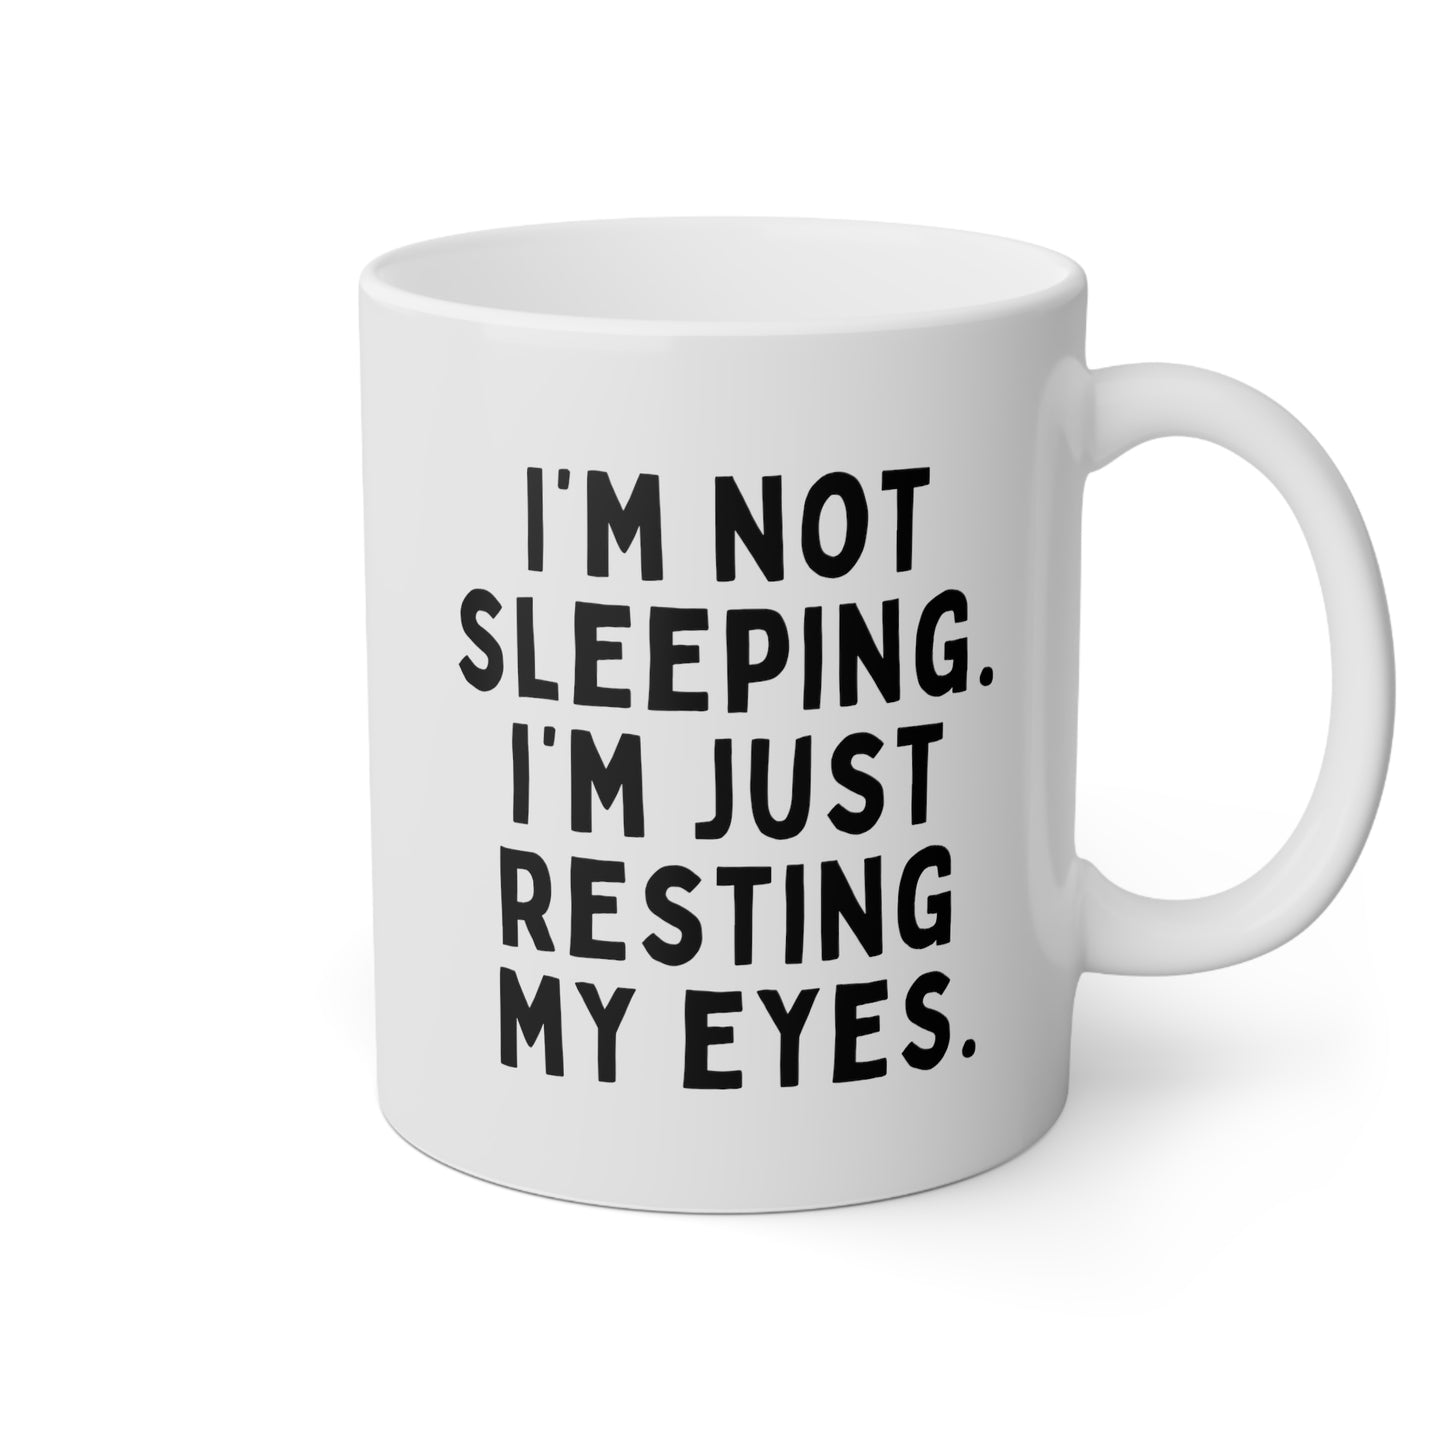 I'm Not Sleeping. I'm Just Resting My Eyes. 11oz white funny large coffee mug gift for dad fathers day daddy husband grandpa cup him waveywares wavey wares wavywares wavy wares